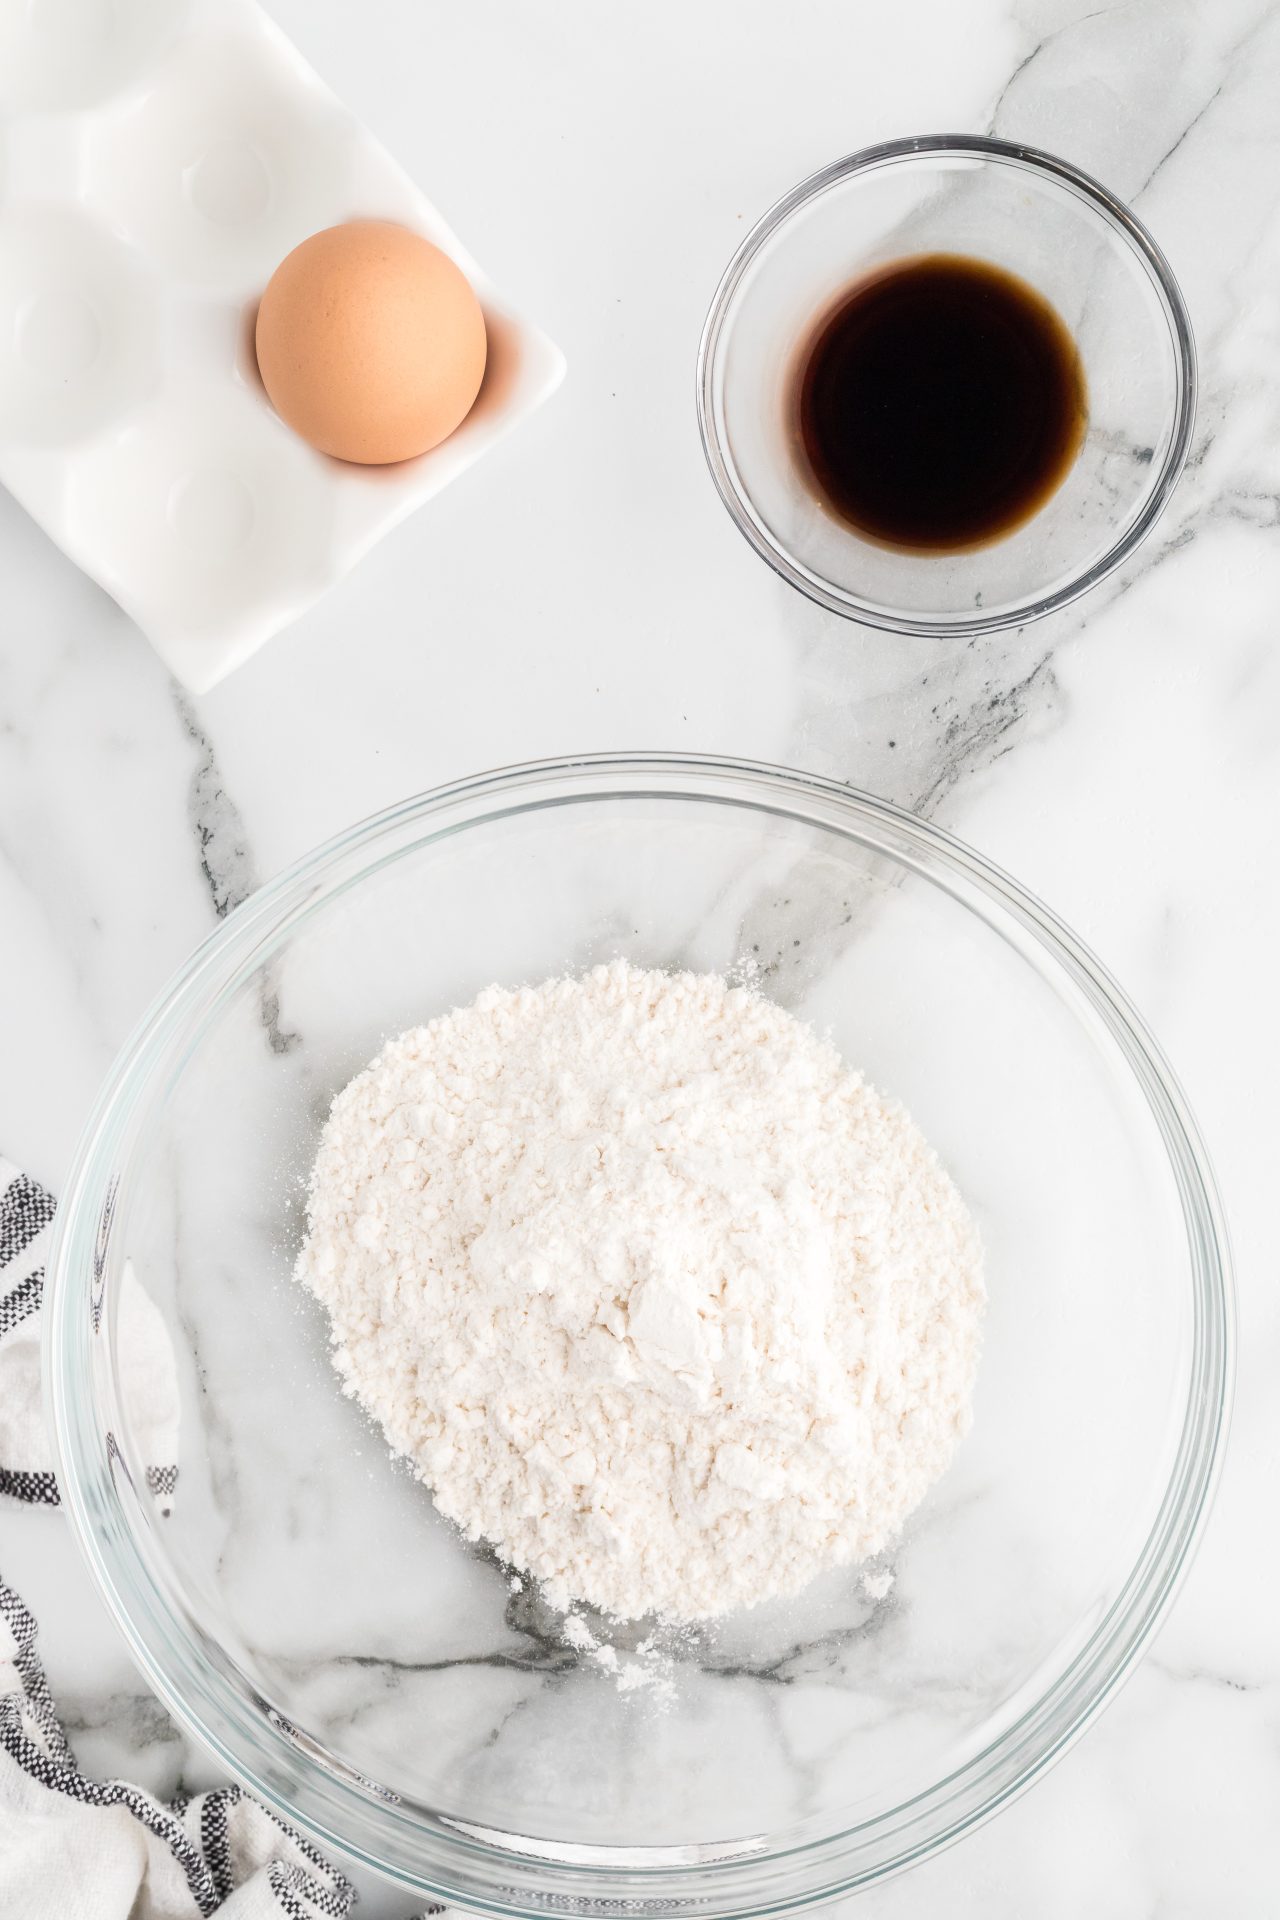 This picture shows a glass bowl with mixed flour, baking powder, and sugar. To the top left of the image is an egg container holding one brown egg and to the top right of the picture is a small bowl with vanilla extract.